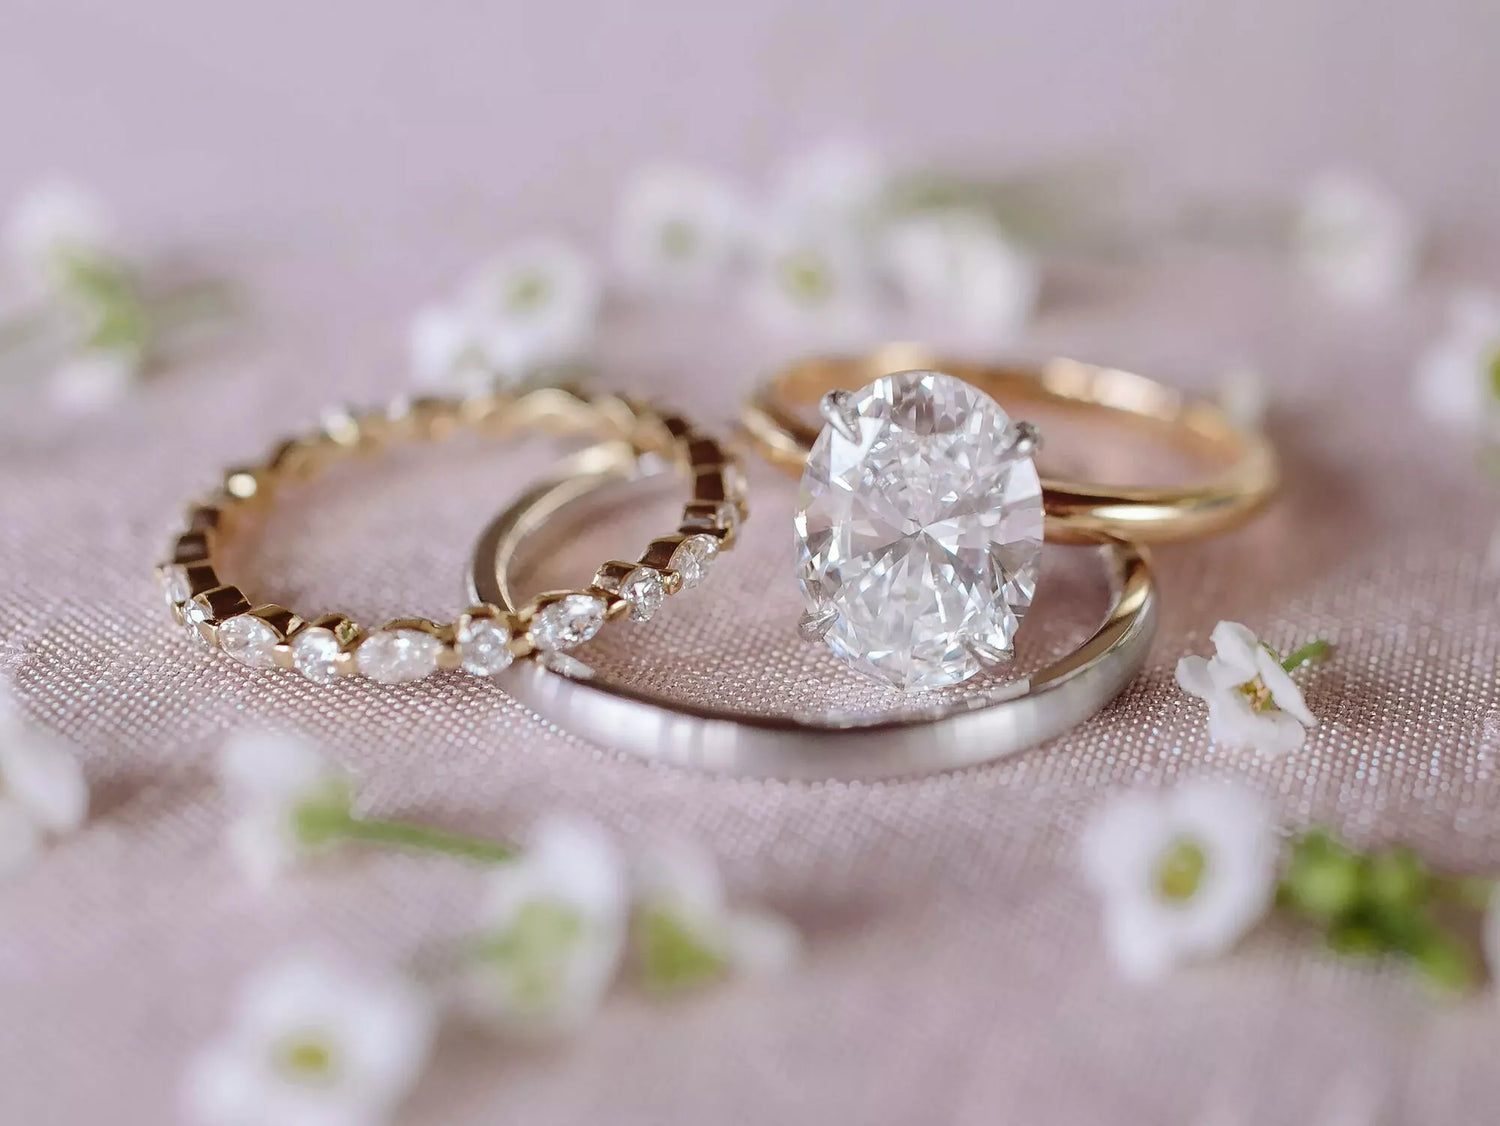 Buying an Engagement Ring in Five Easy Steps